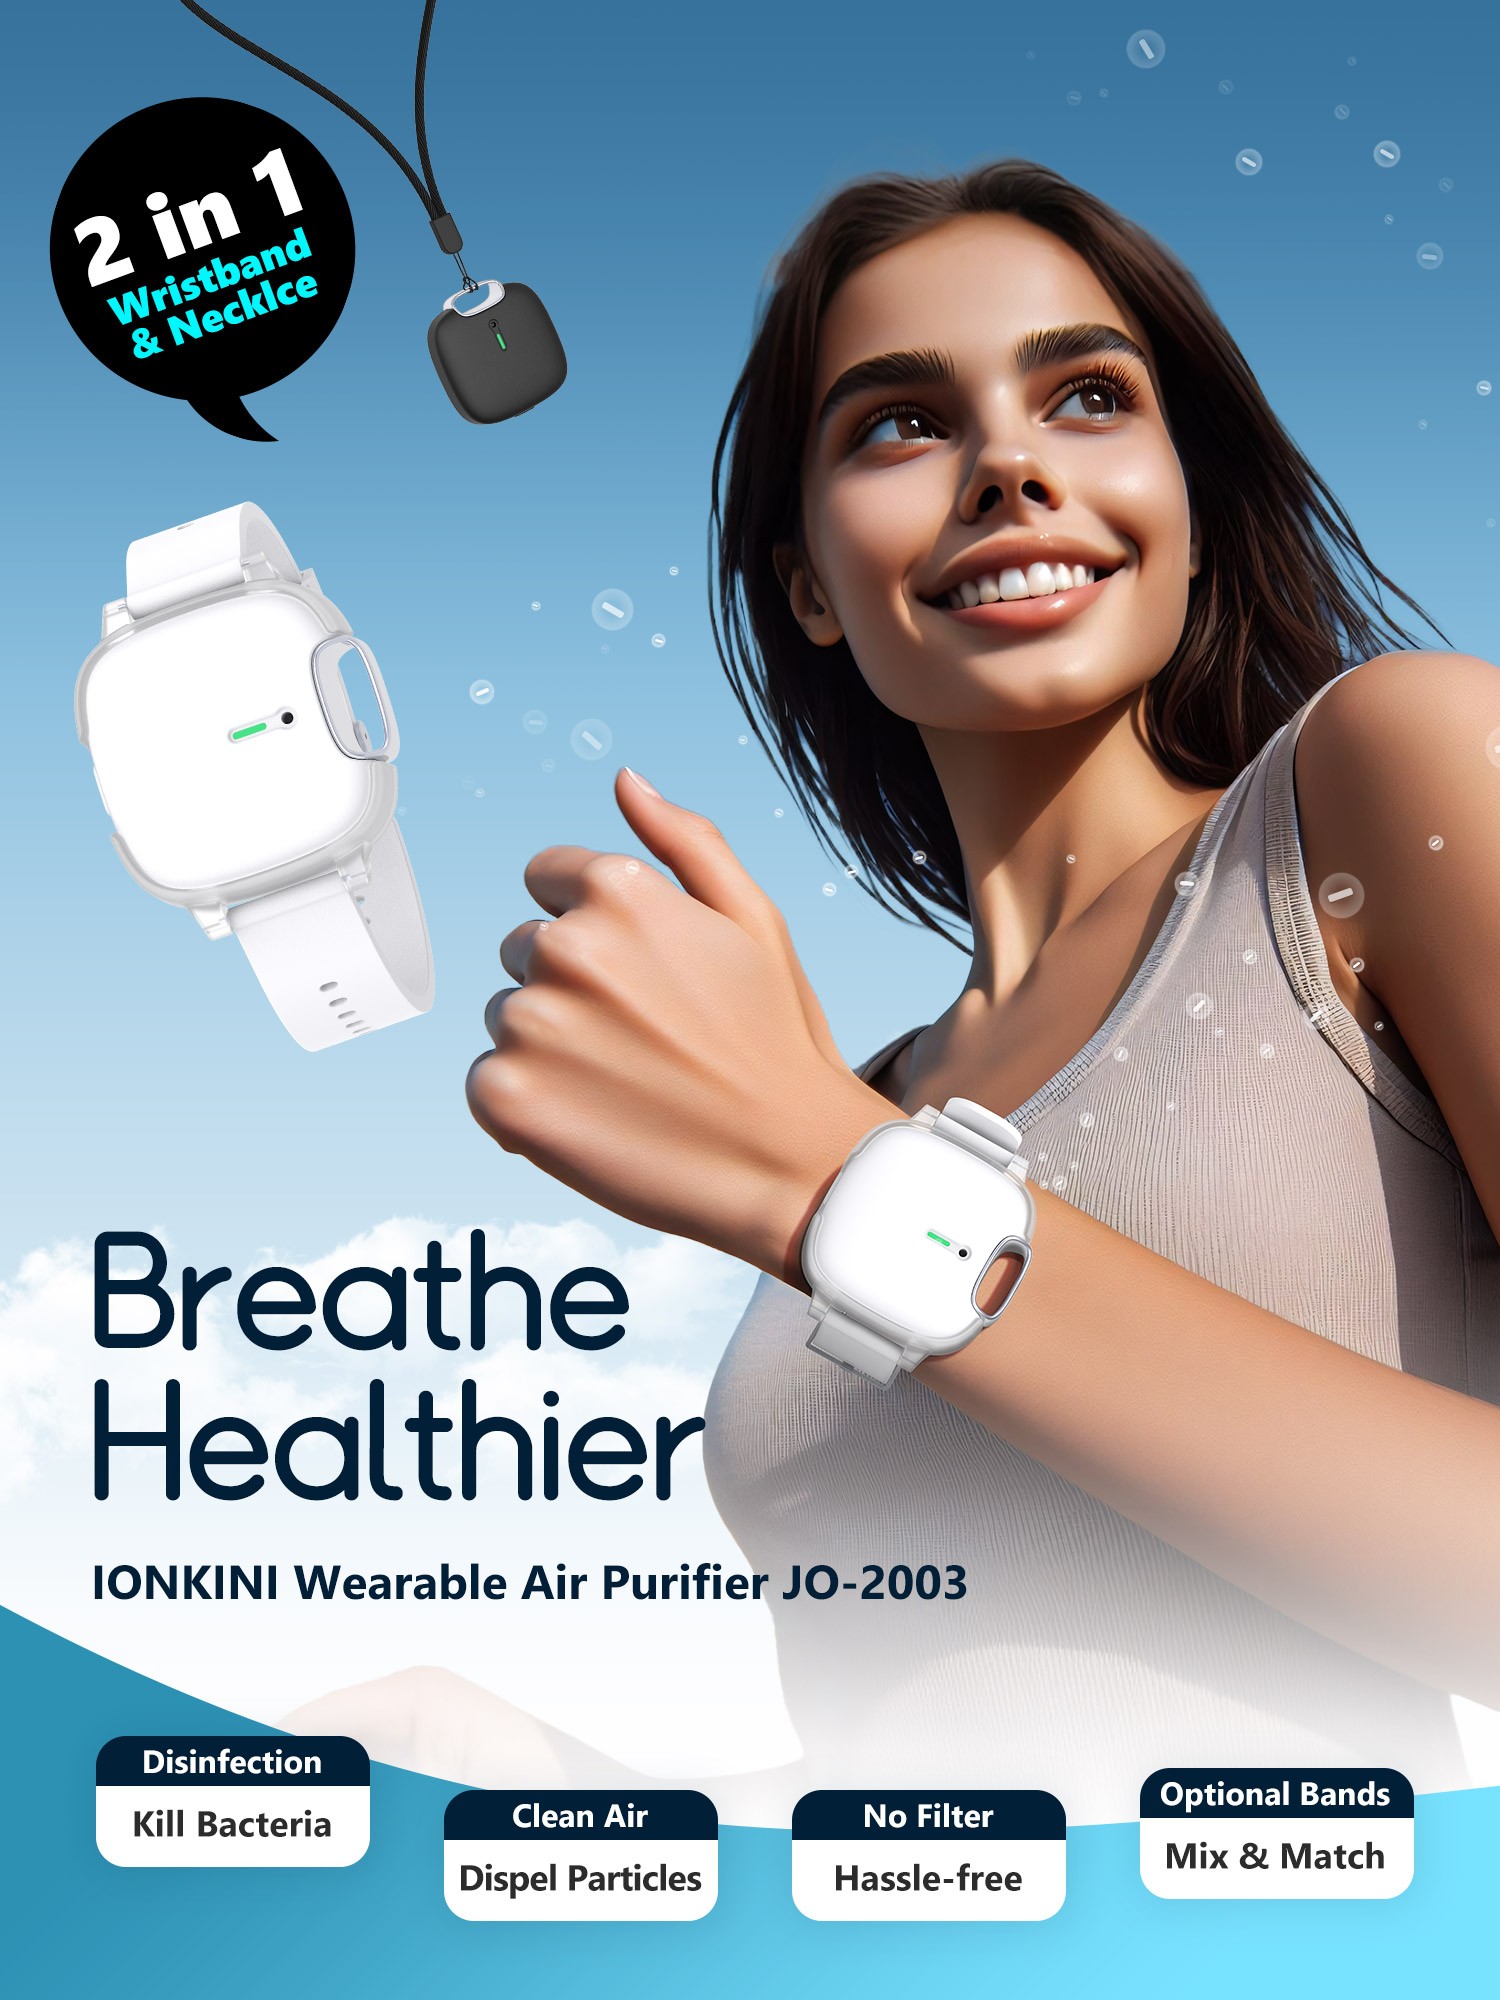 personal air purifier wristband and necklace